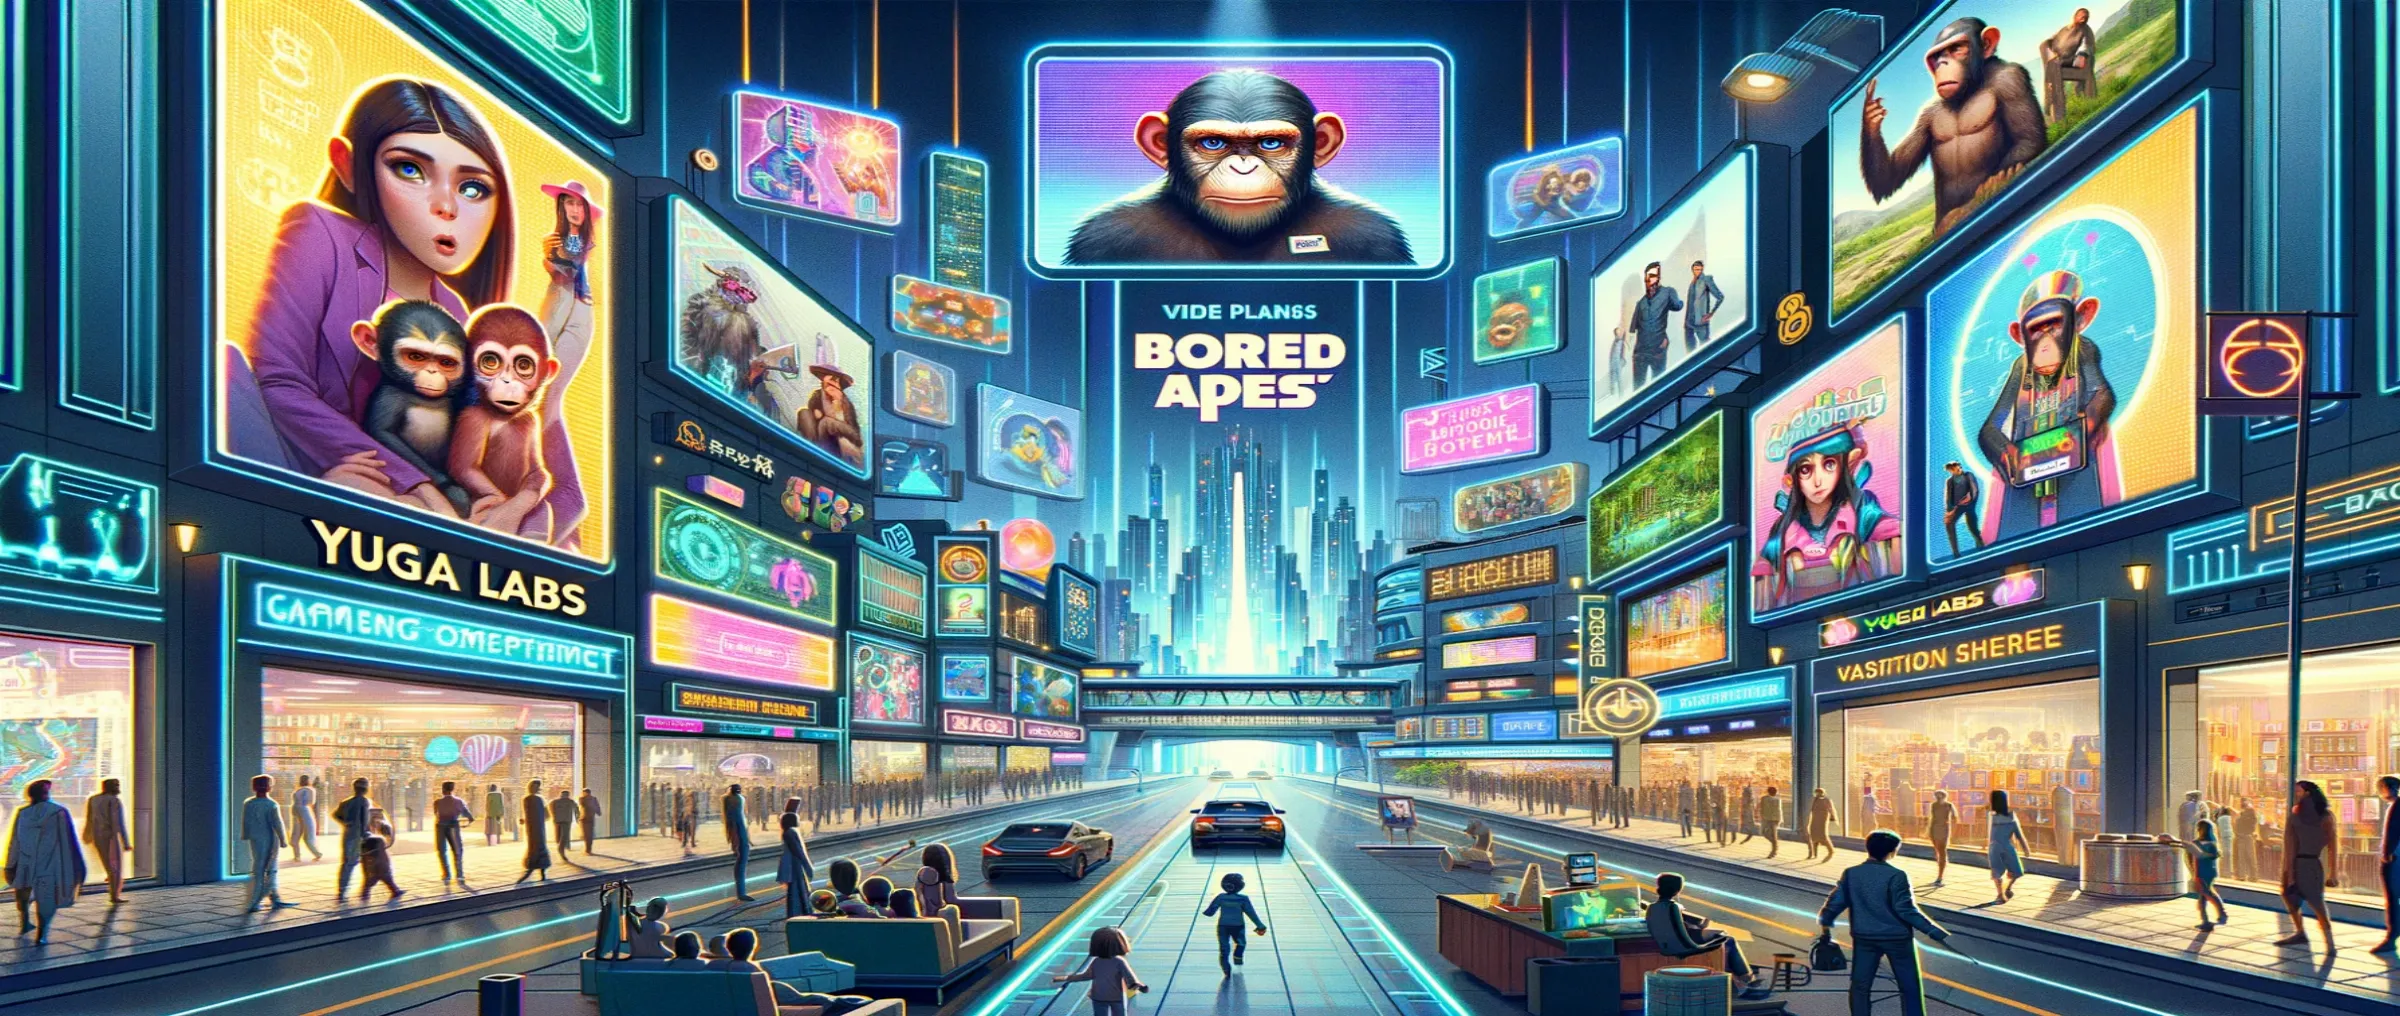 Co-founder of Yuga Labs announced ambitious plans for the Bored Apes franchise